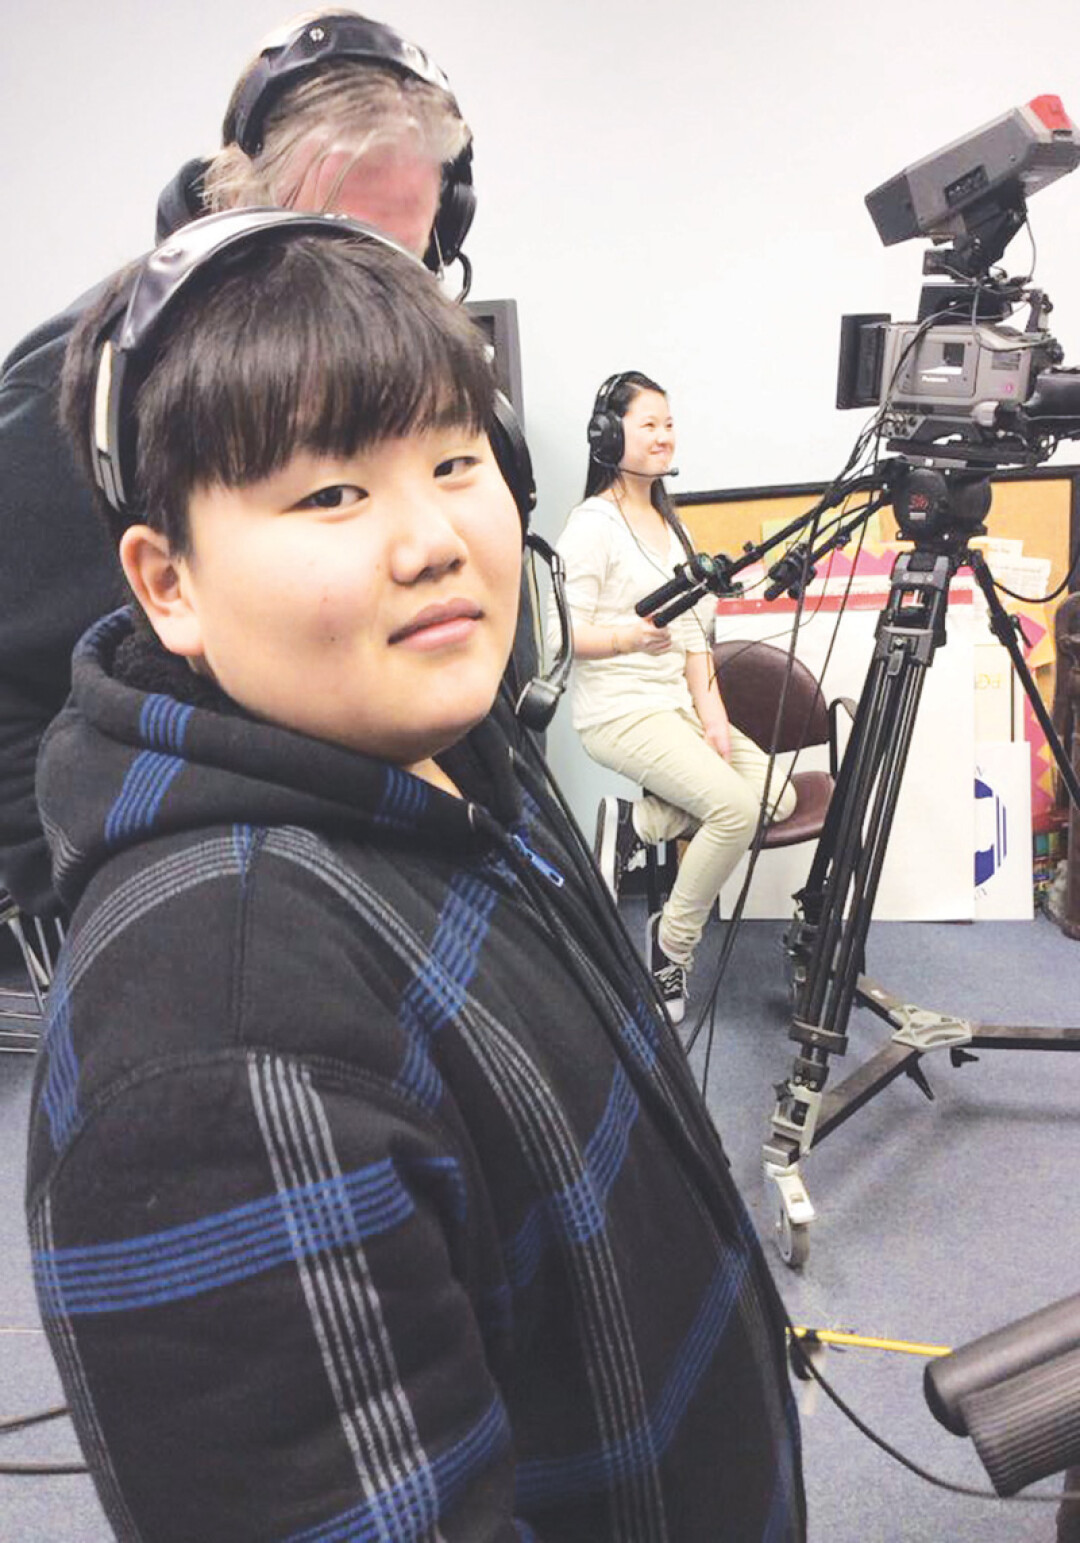 THE BUILDING BRIDGES FOR YOUTH PROGRAM PROVIDES MENTORING AND ACTIVITIES FOR HMONG YOUNG PEOPLE, SUCH AS PRODUCING A COOKING SHOW ON CHIPPEWA VALLEY COMMUNITY TELEVISION.